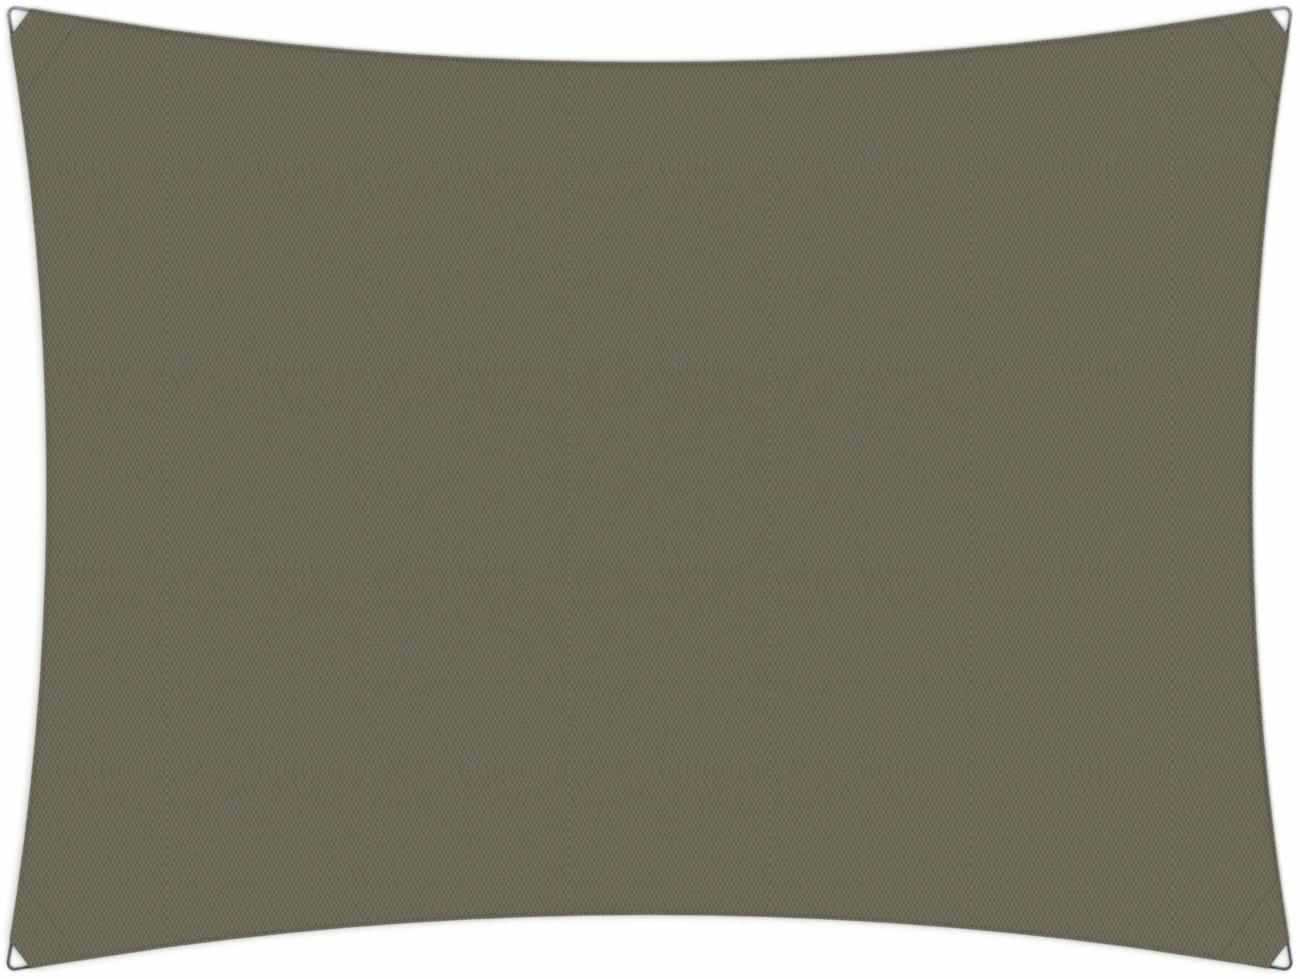 Ingenua shade sail Rectangle 5 x 3 m, for outdoor use. Colour of the fabric shade sail Taupe.